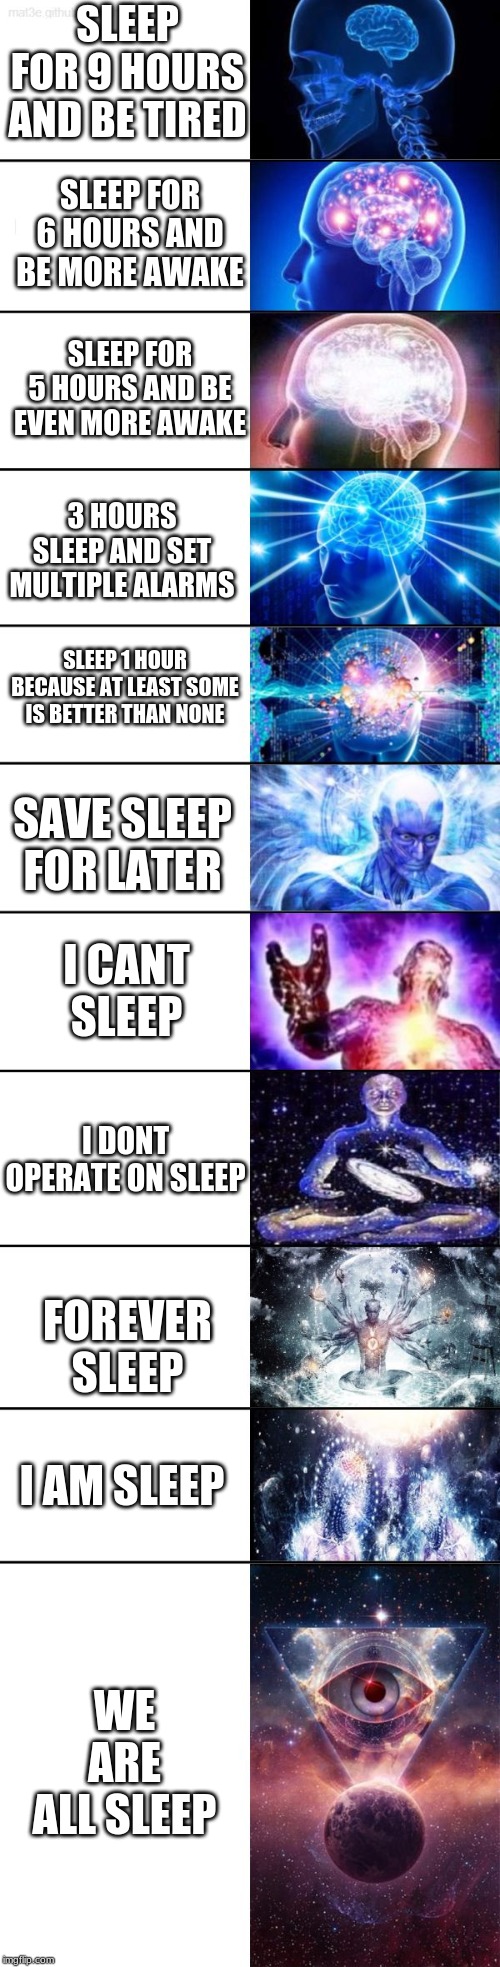 Big Brain Meme | SLEEP FOR 9 HOURS AND BE TIRED; SLEEP FOR 6 HOURS AND BE MORE AWAKE; SLEEP FOR 5 HOURS AND BE EVEN MORE AWAKE; 3 HOURS SLEEP AND SET MULTIPLE ALARMS; SLEEP 1 HOUR BECAUSE AT LEAST SOME IS BETTER THAN NONE; SAVE SLEEP FOR LATER; I CANT SLEEP; I DONT OPERATE ON SLEEP; FOREVER SLEEP; I AM SLEEP; WE ARE ALL SLEEP | image tagged in big brain meme | made w/ Imgflip meme maker